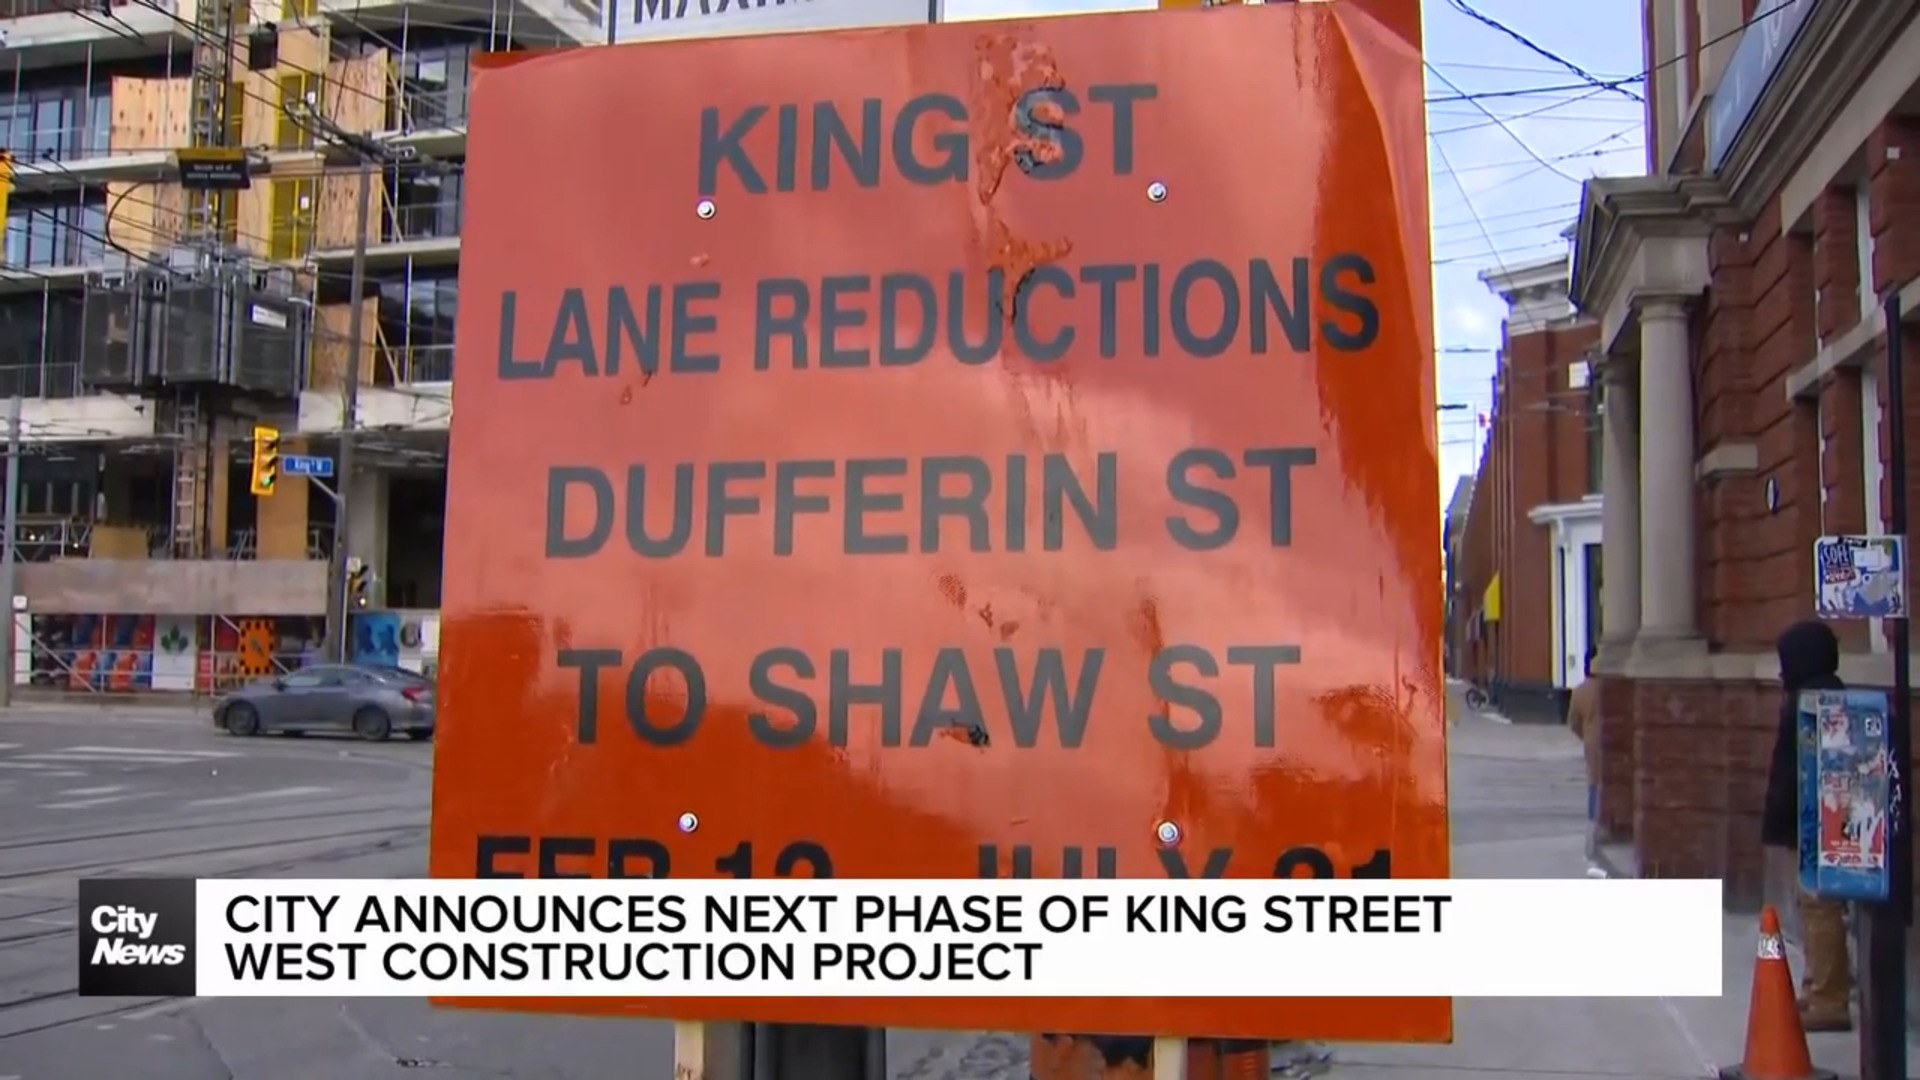 City announces upcoming road closures along King Street West to accommodate construction